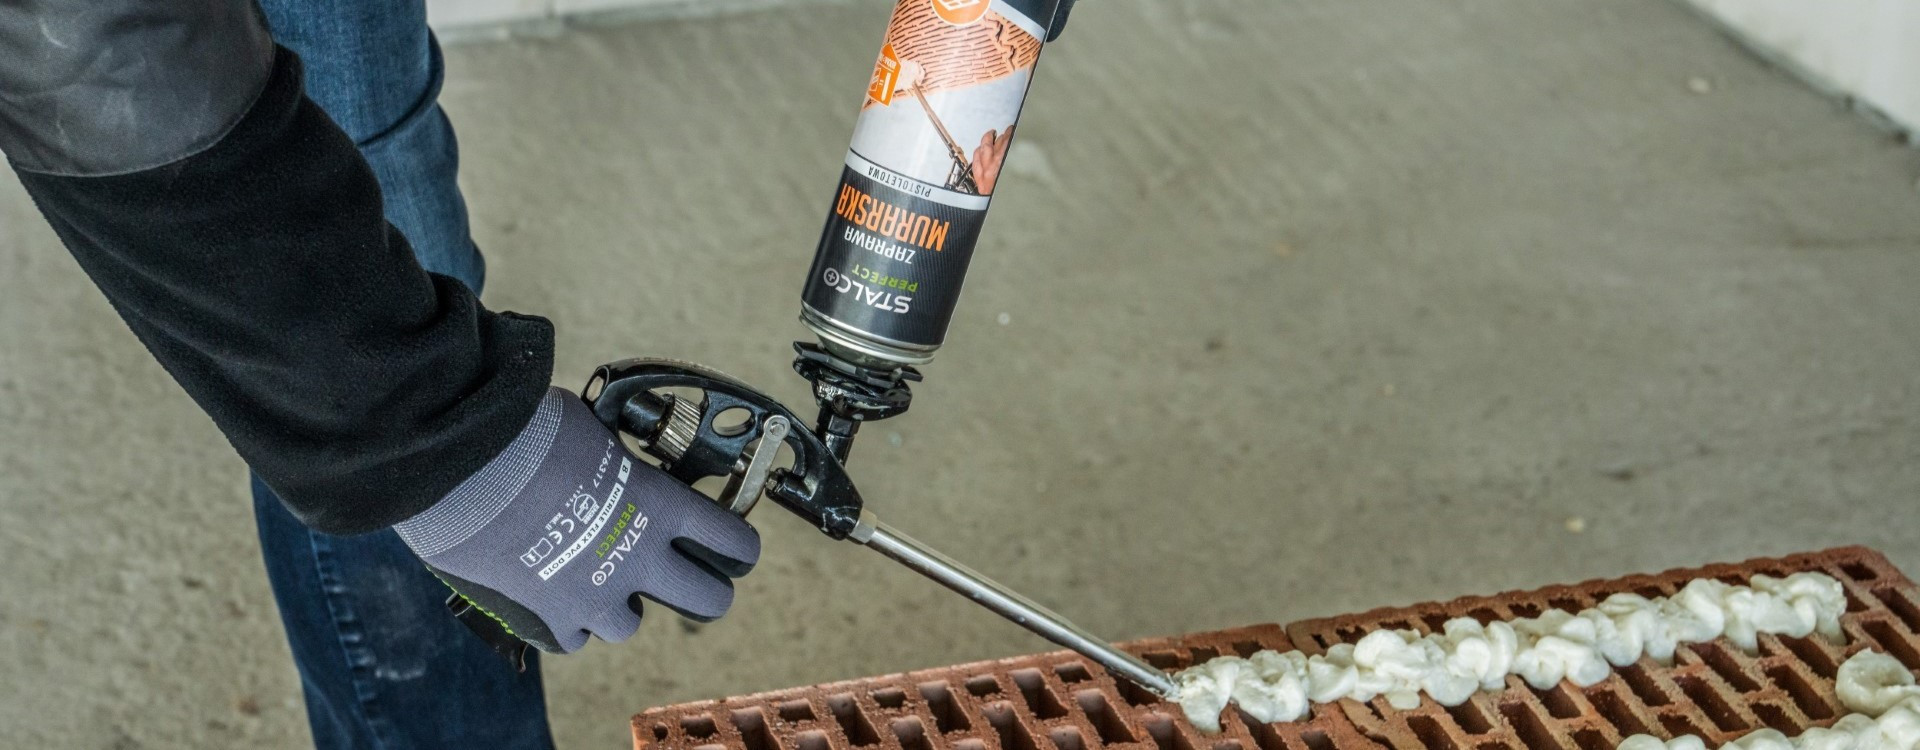 WHICH SILICONE AND SEALANT TO CHOOSE?